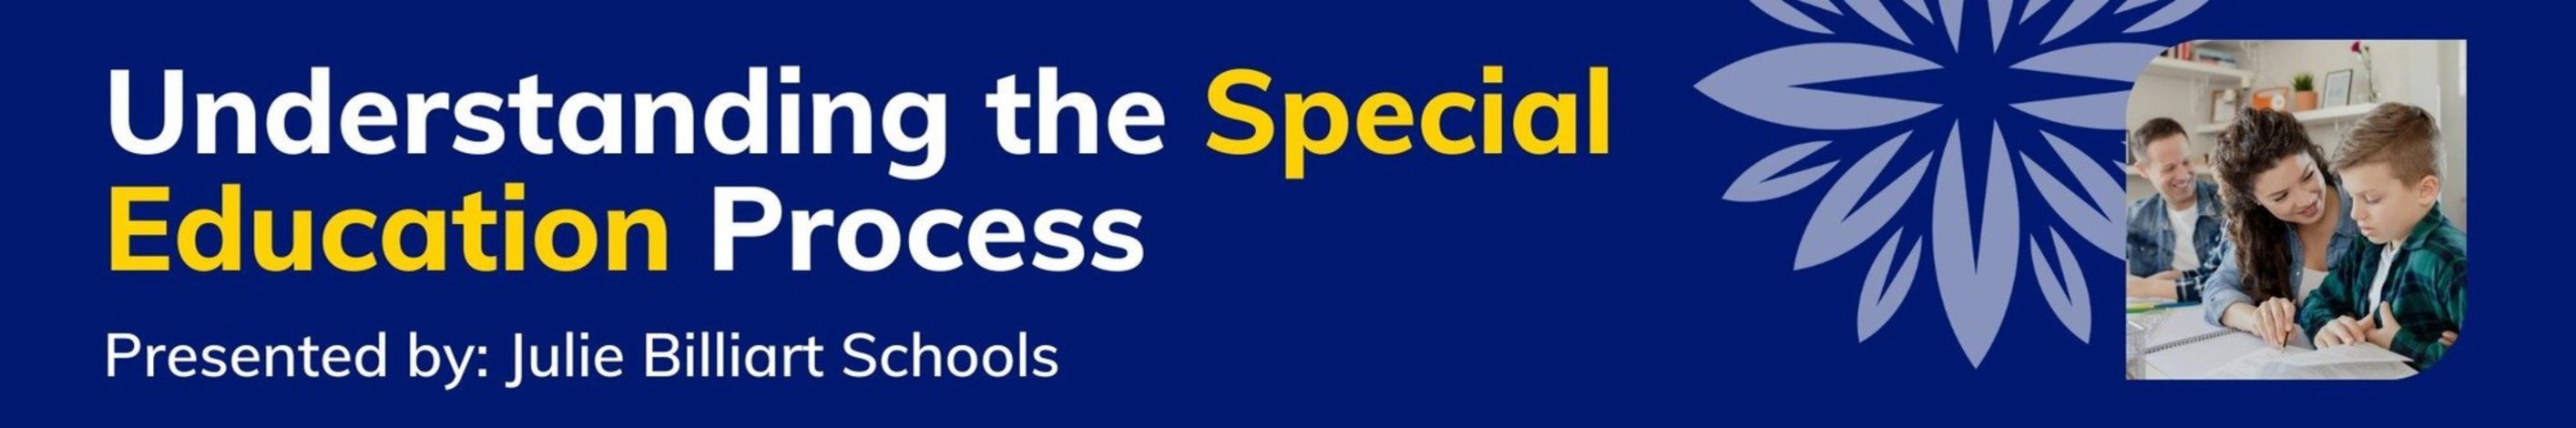 Special Education Banner